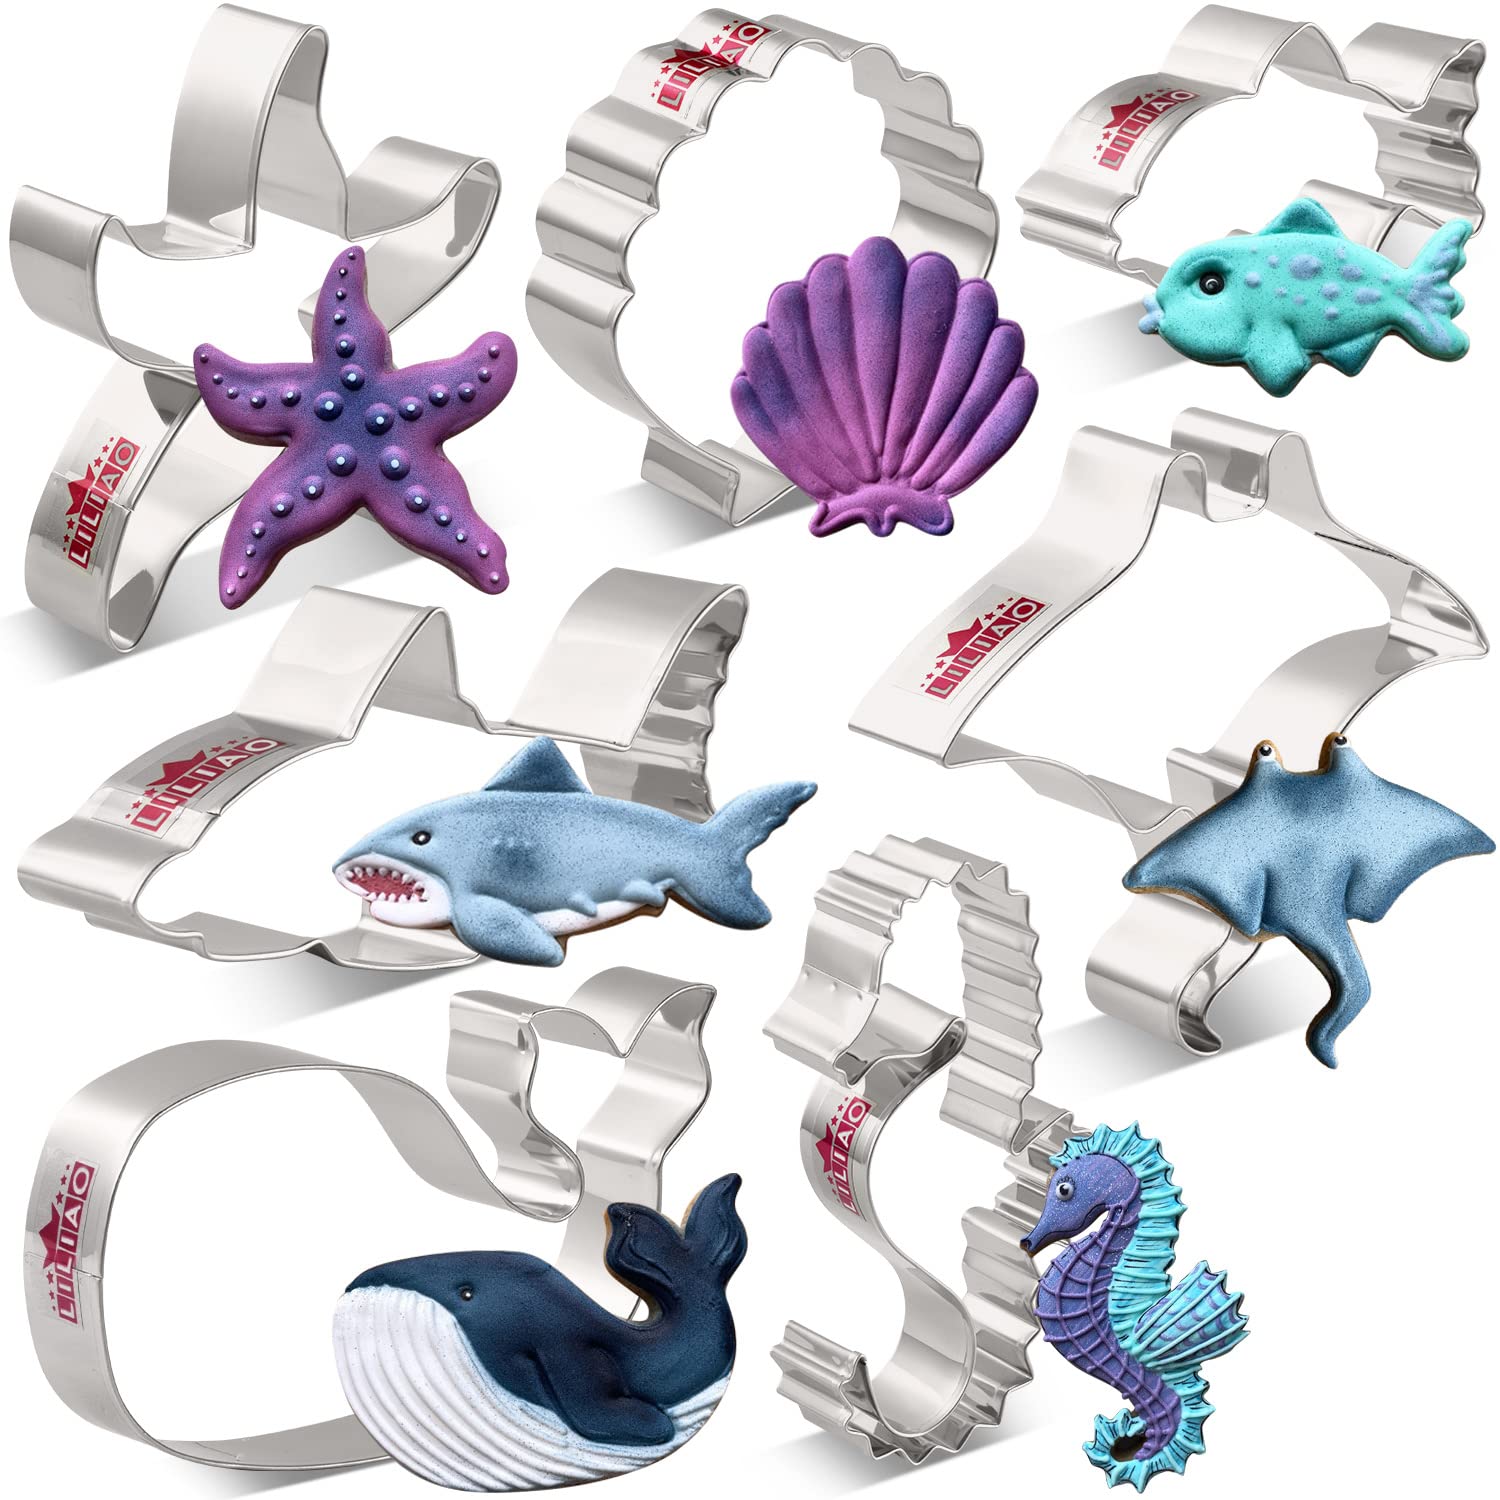 LILIAO Under The Sea Cookie Cutter Set - 7 Piece - Shark, Whale, Fish, Manta, Starfish, Shell and Seahorse Biscuit Fondant Cutters - Stainless Steel